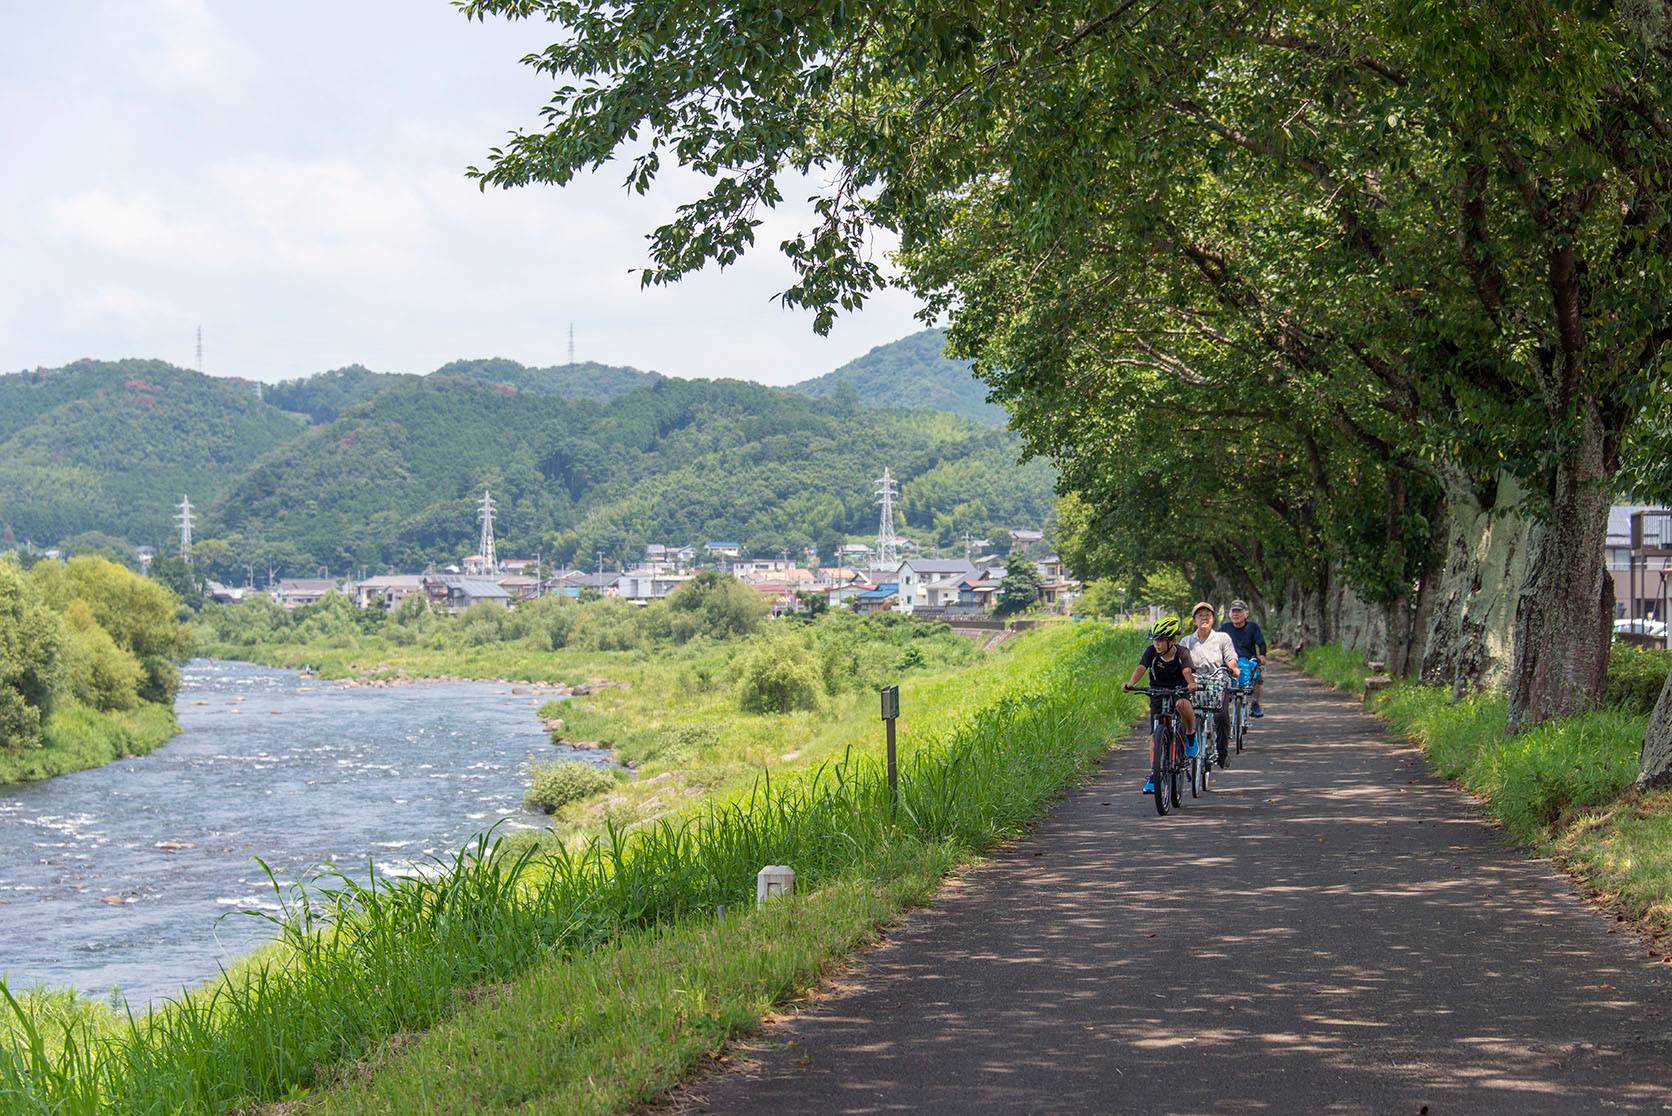 Cyclists ride along the Kano River in Izu City, Shizuoka Prefecture, in August 2019. | ROB GILHOOLY